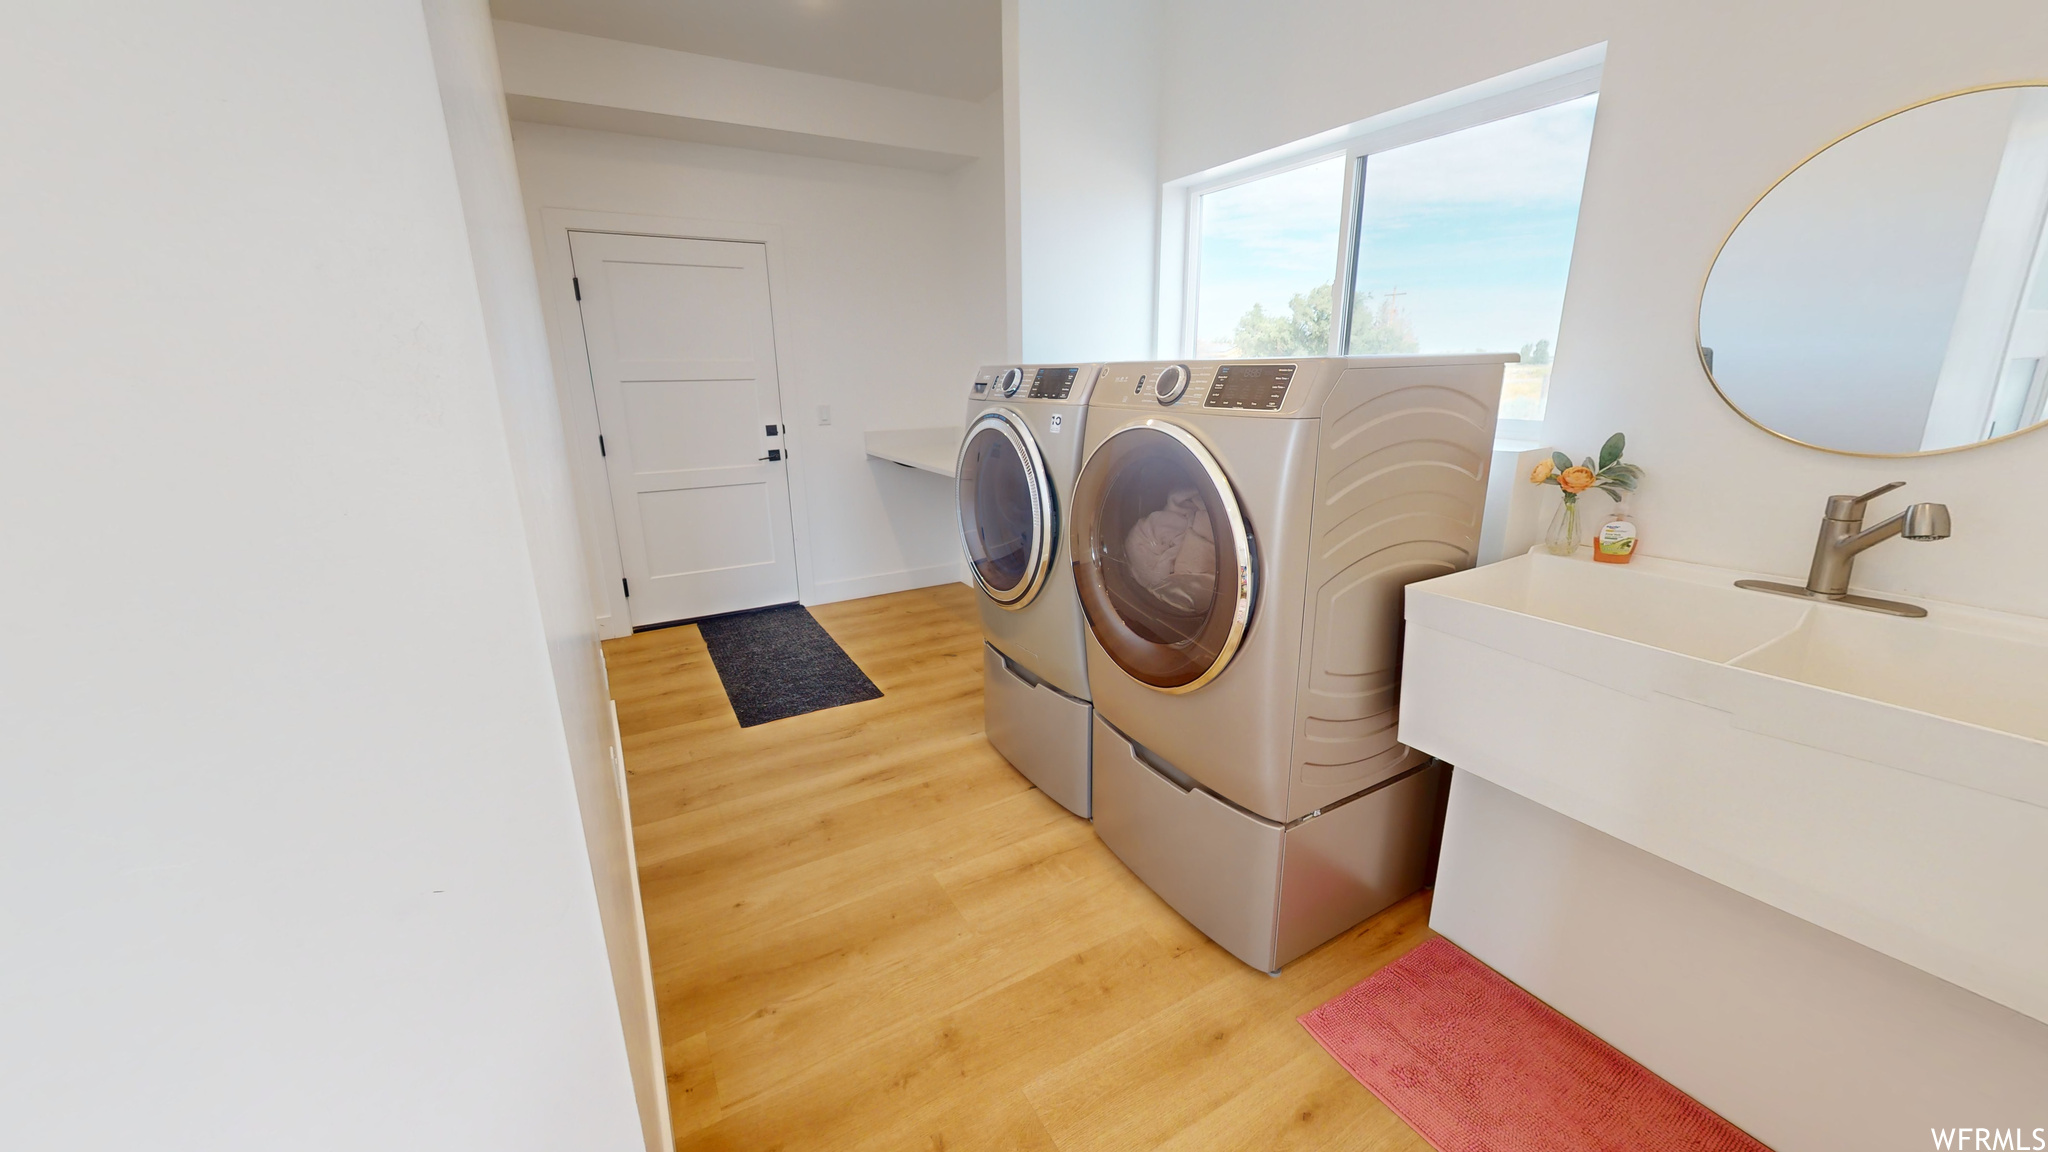 Clothes washing area with washer and dryer and light hardwood / wood-style floors